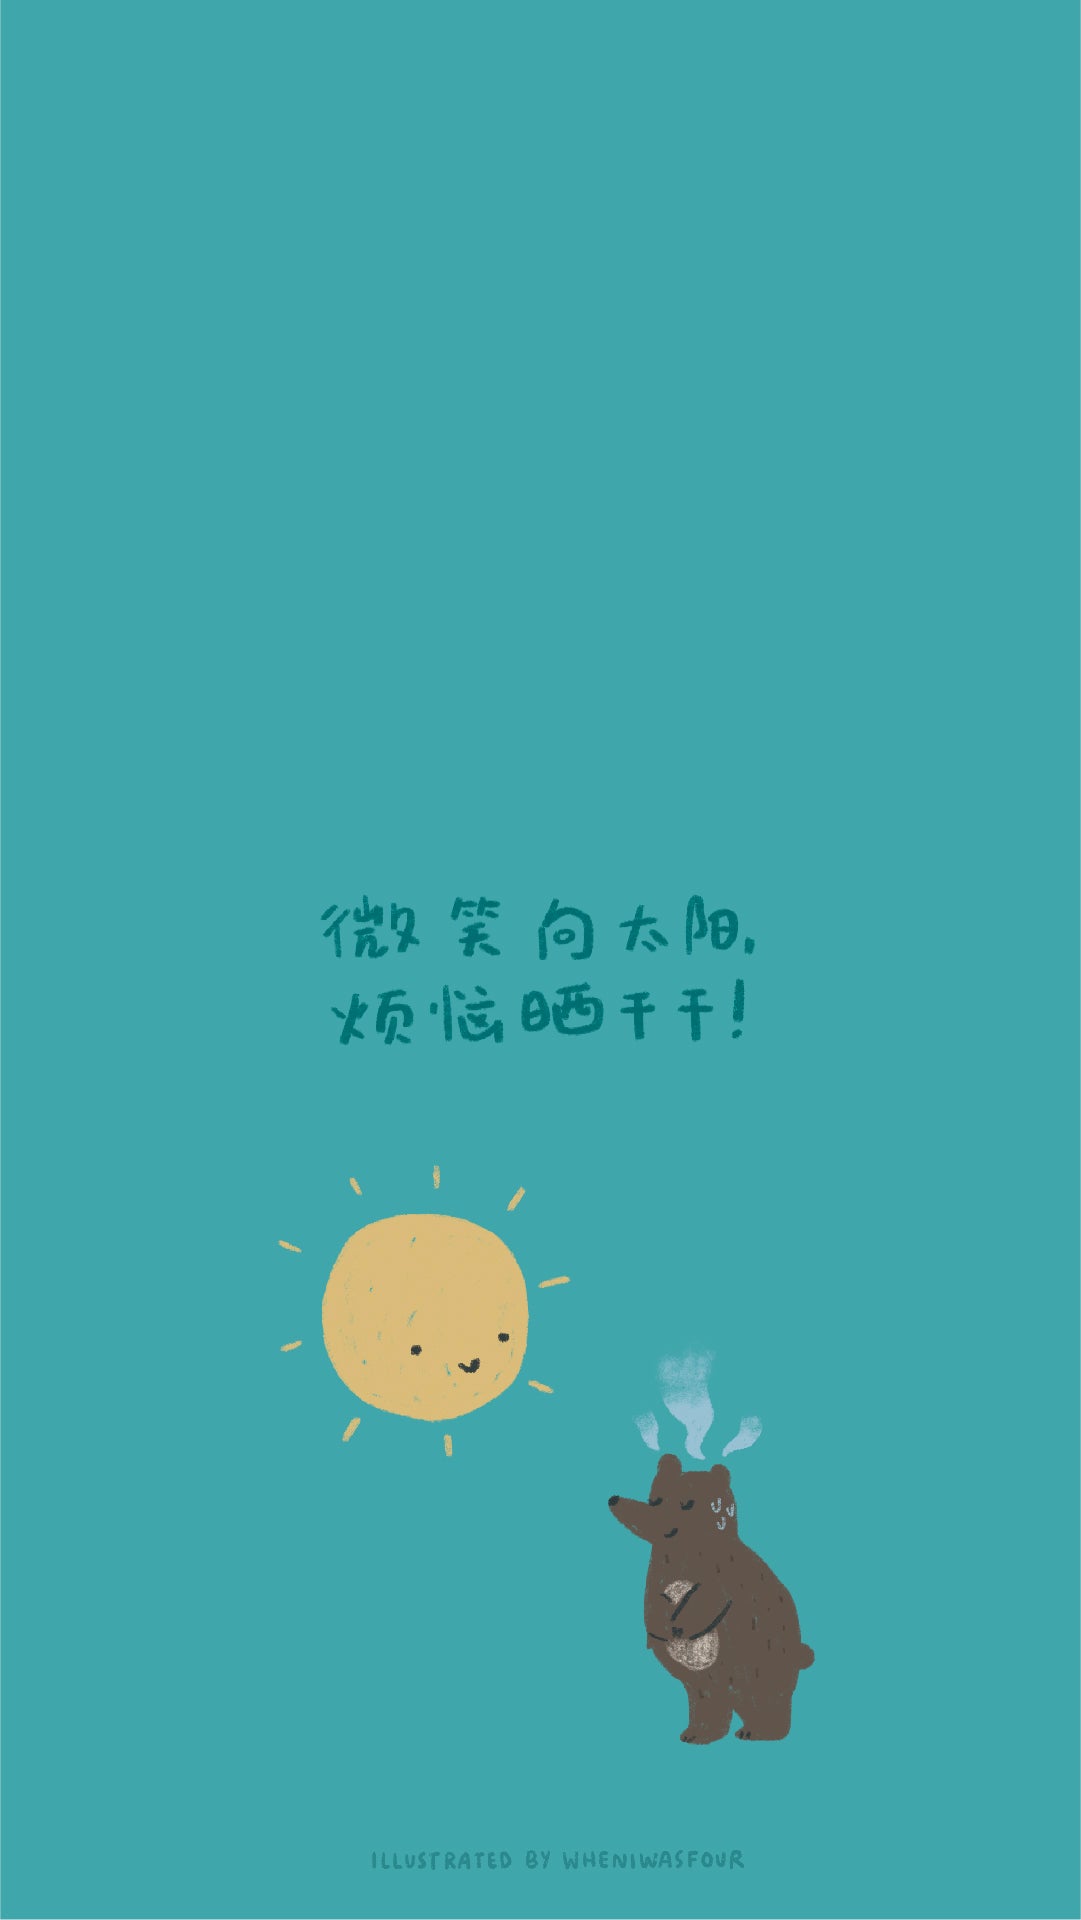 phone wallpaper of a digital illustration of a chinese verse about looking up at the sun and making your worries and troubles disappear